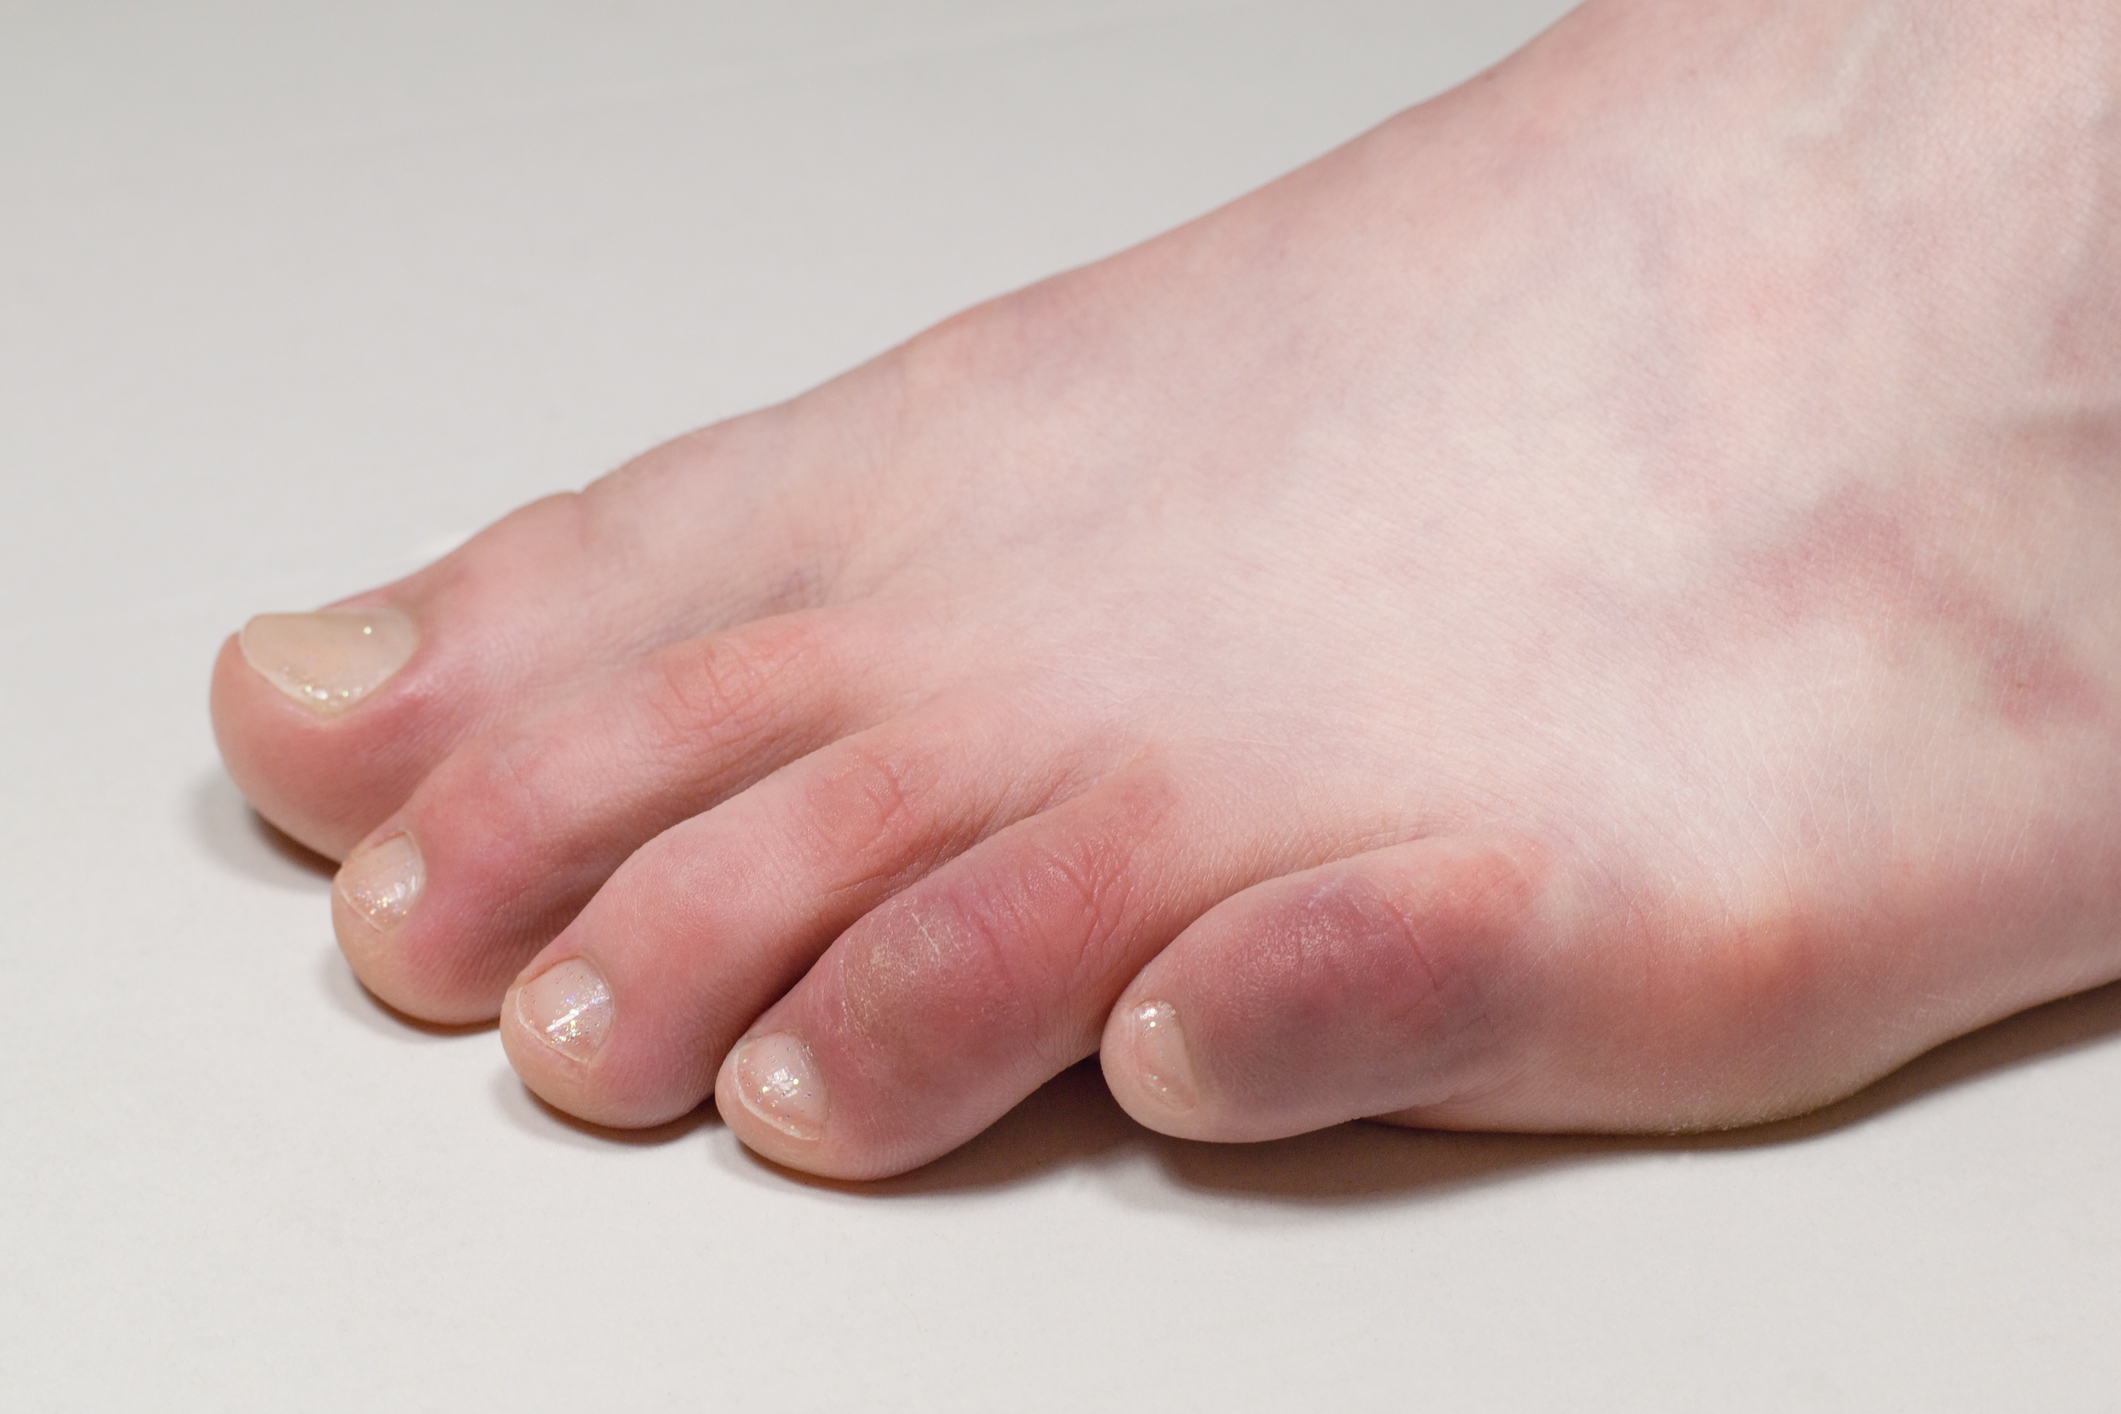 ‘COVID toes’ were likely not caused by COVID-19, in most cases